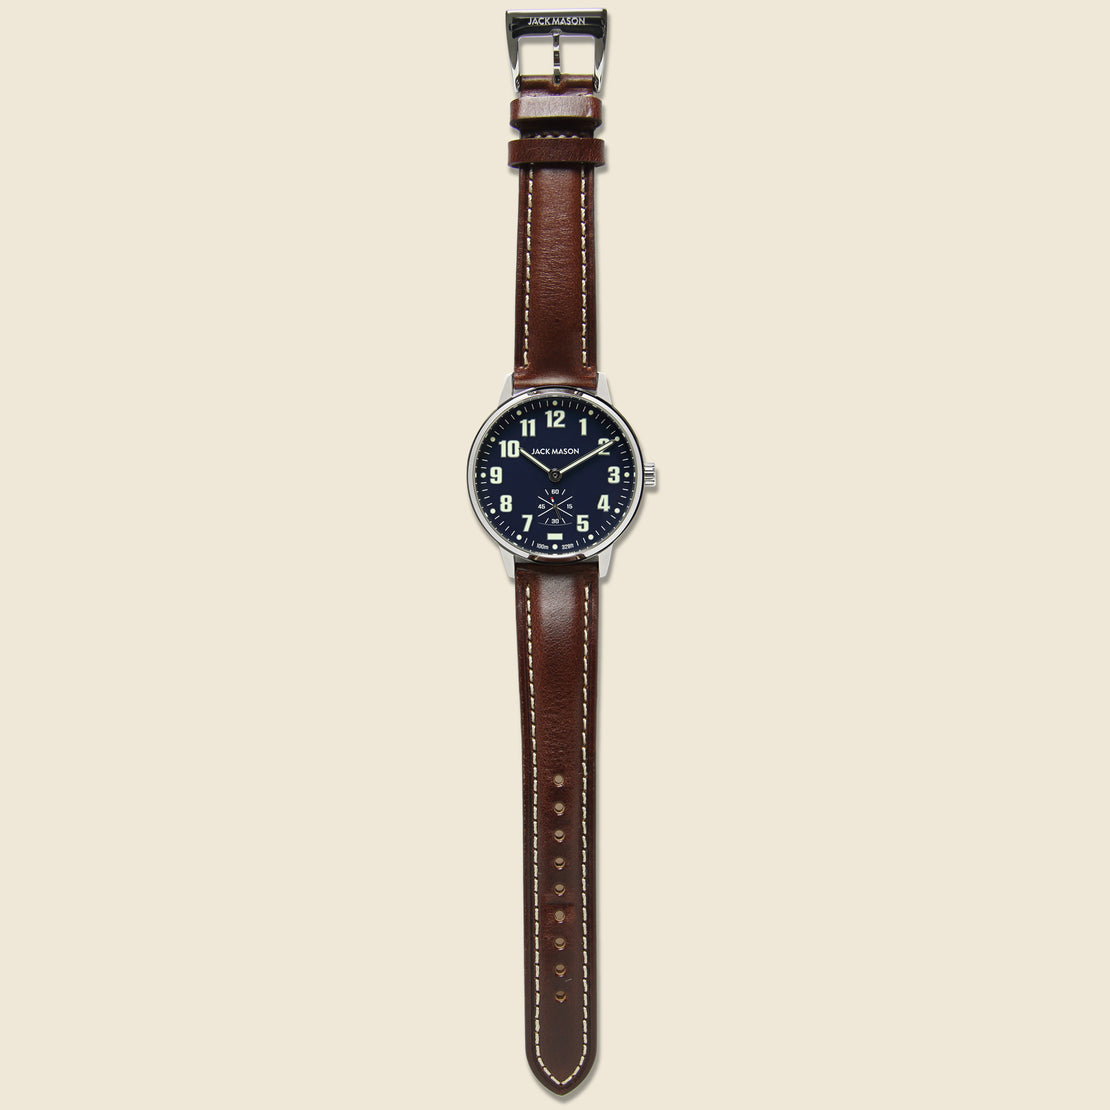 Field Camp Watch 38mm - Navy/Brown Leather - Jack Mason - STAG Provisions - Accessories - Watches